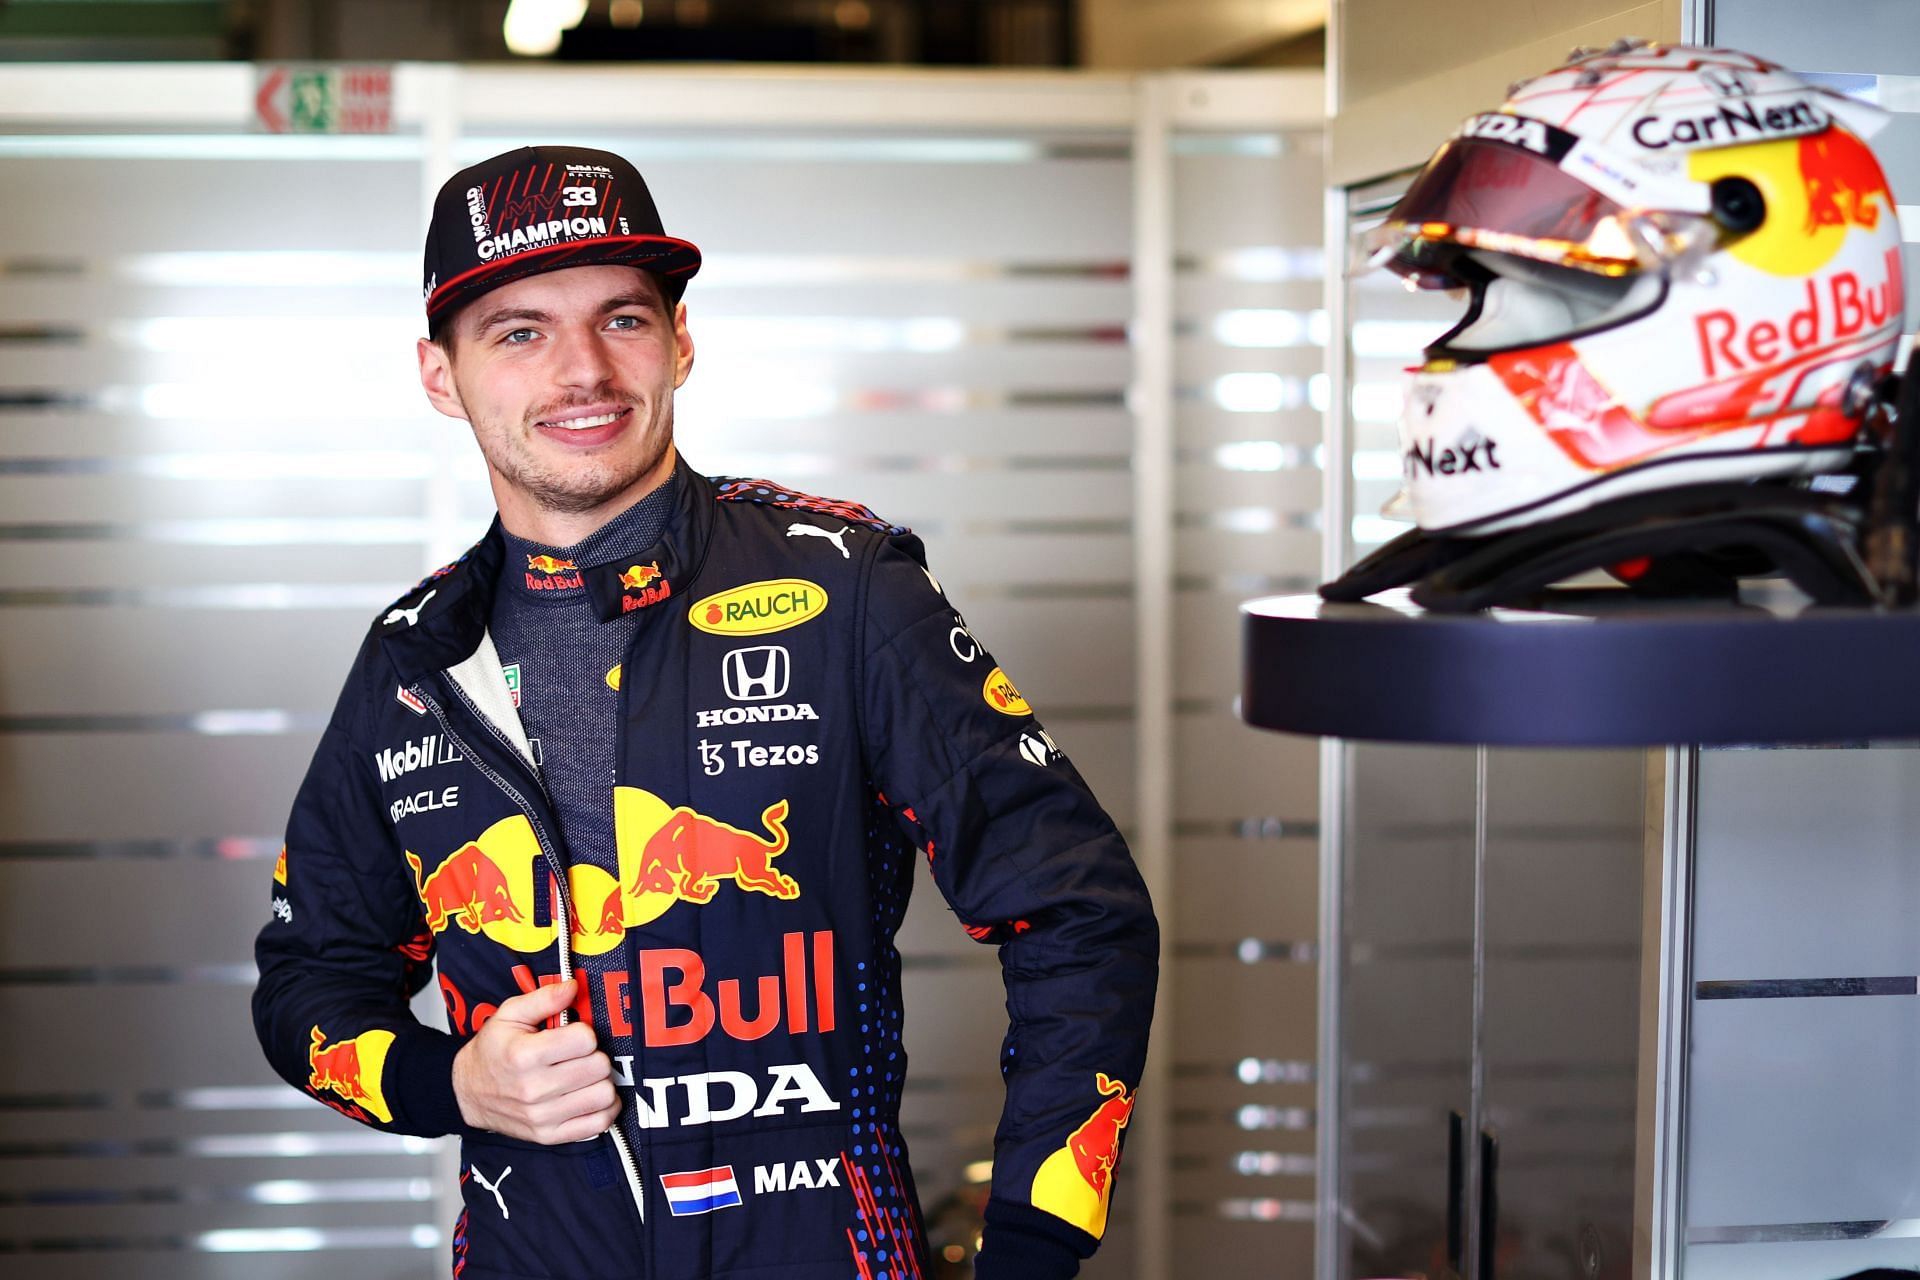 Max Verstappen prepares to drive in the garage during the F1 Abu Dhabi GP (Photo by Clive Rose/Getty Images)